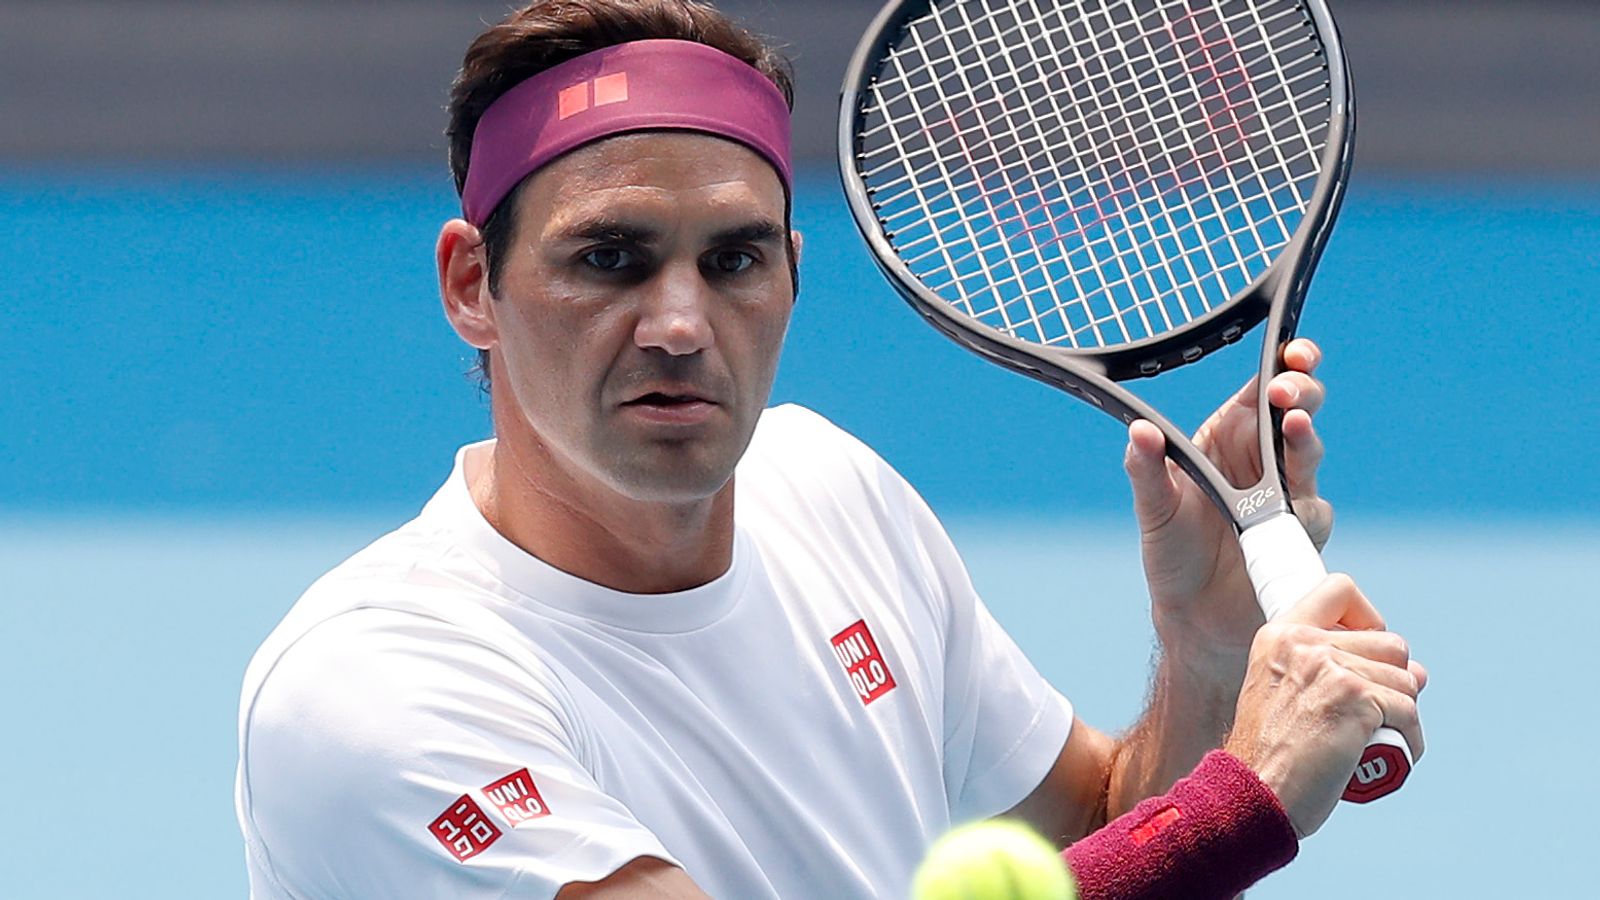 Roger Federer says he is fit and raring to go ahead of the Australian Open | Tennis News | Sky ...